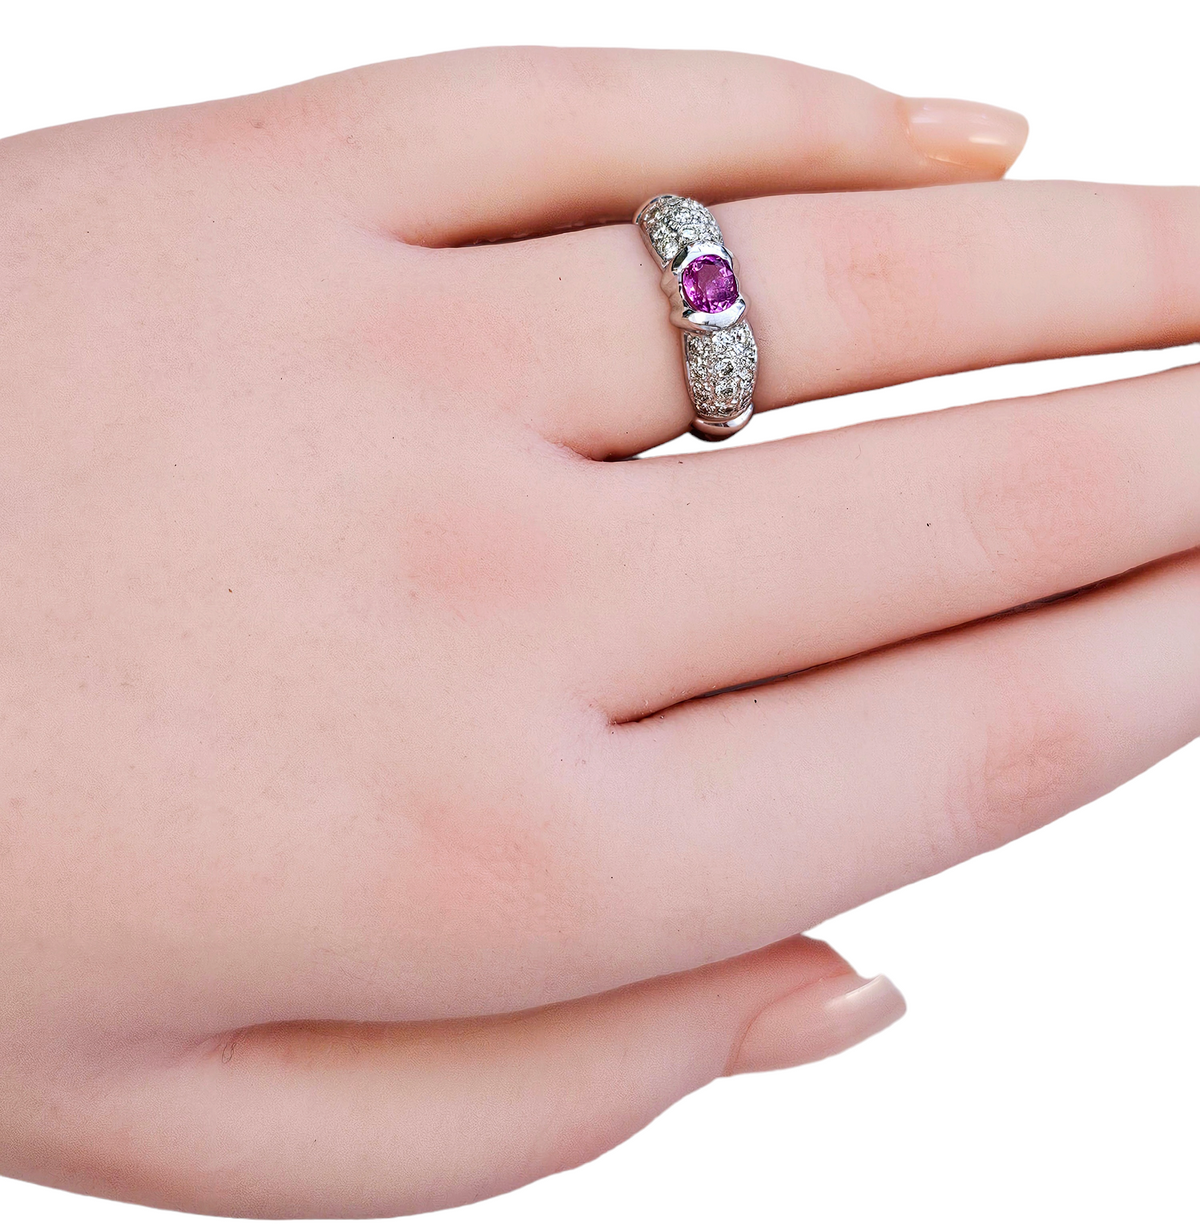 Oval Cut Pink Sapphire Half-Bezel and Pave set Diamond Ring made in 14-Karat White Gold